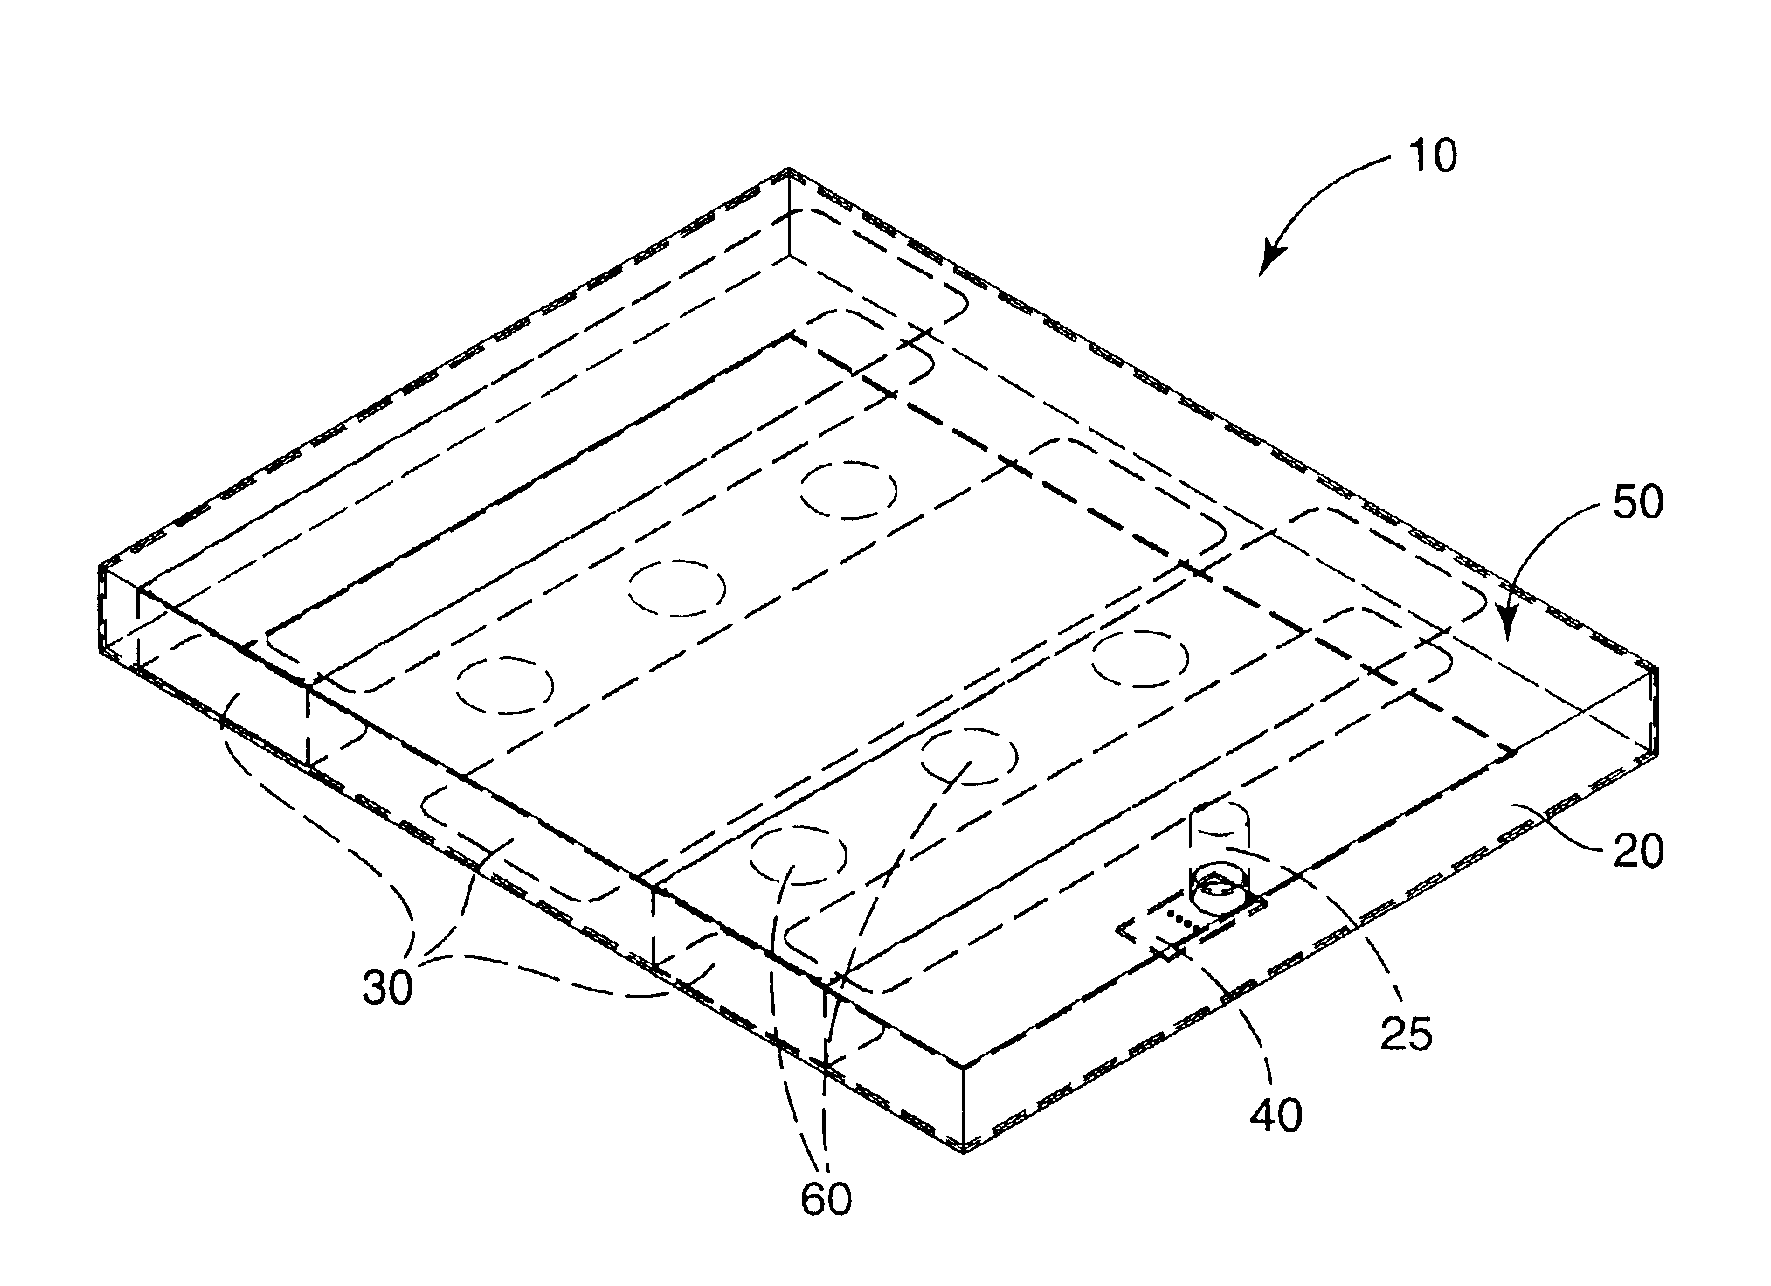 Breathable moisture barrier for an occupant sensing system